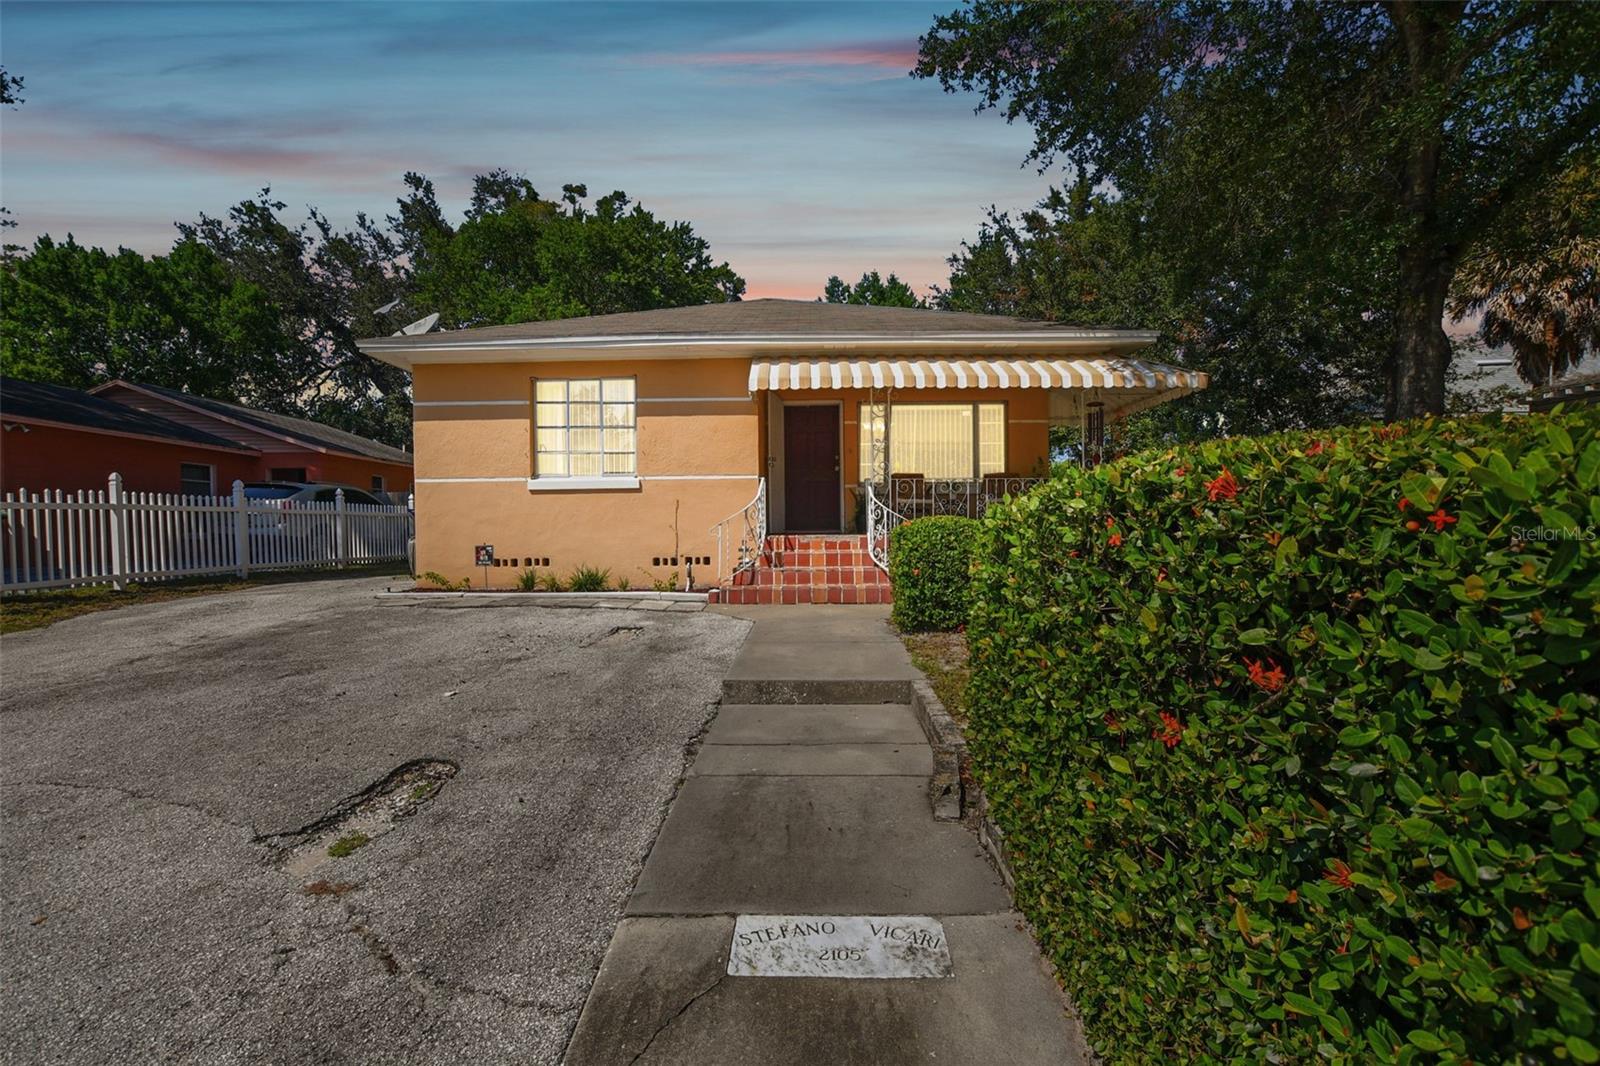 Beautiful, historic Spanish style bungalow with plenty of parking space!